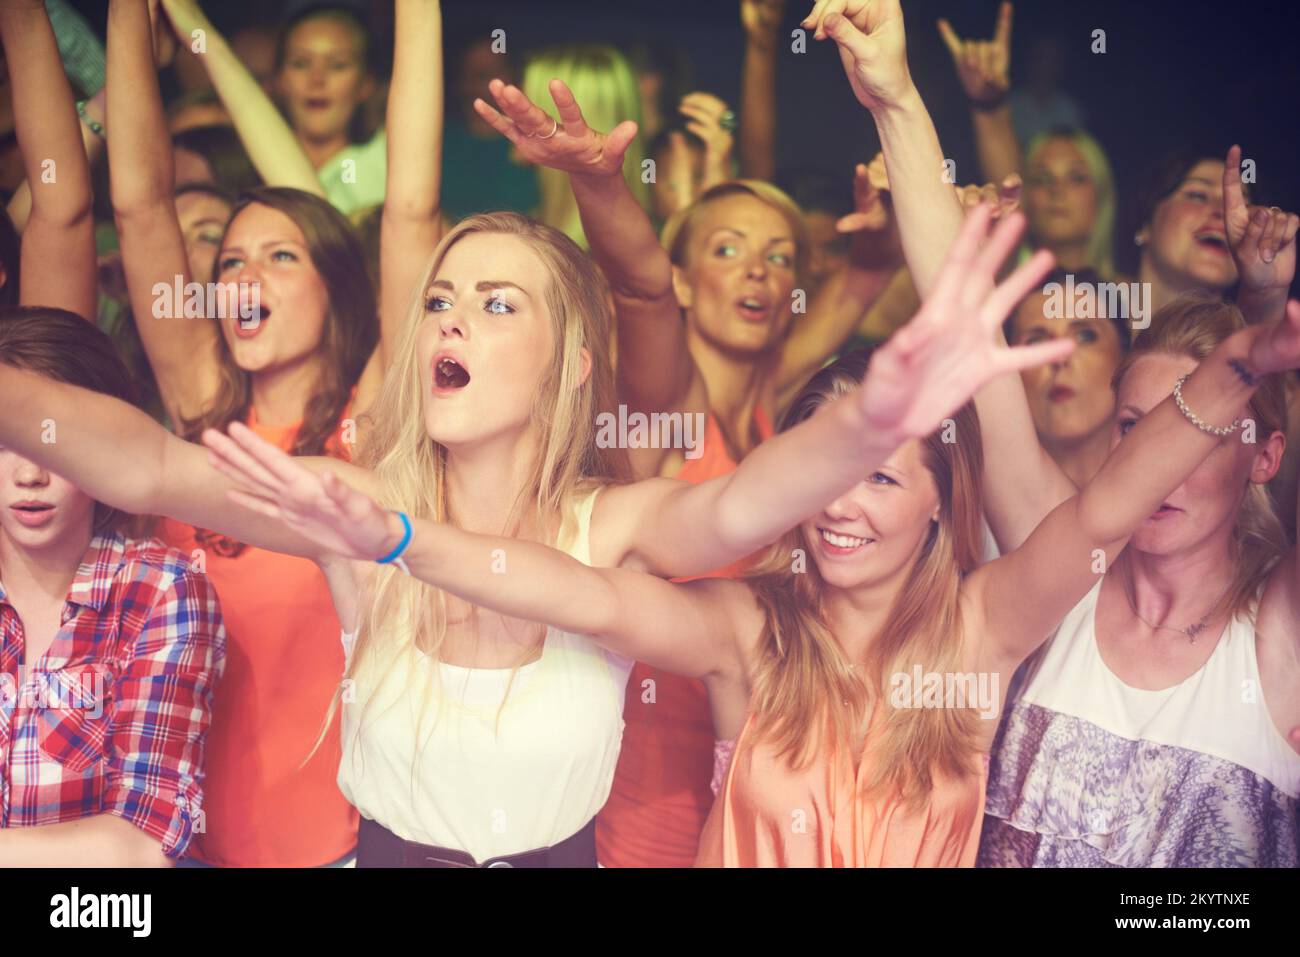 Concert, music festival and crowd of women or audience in night